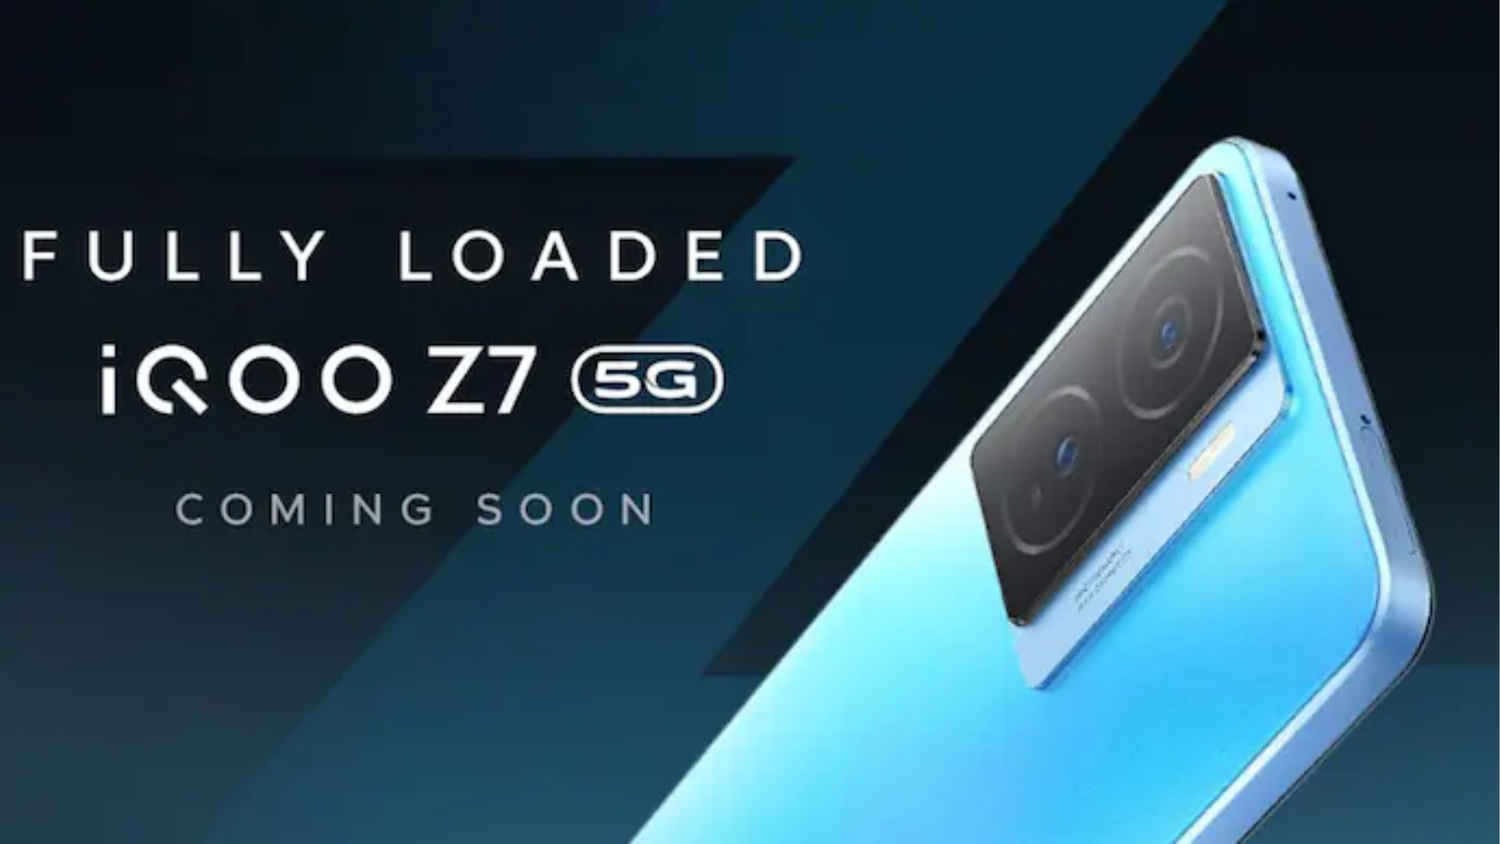 5 disruptive iQOO Z7 specs revealed ahead of launch in India on March 21